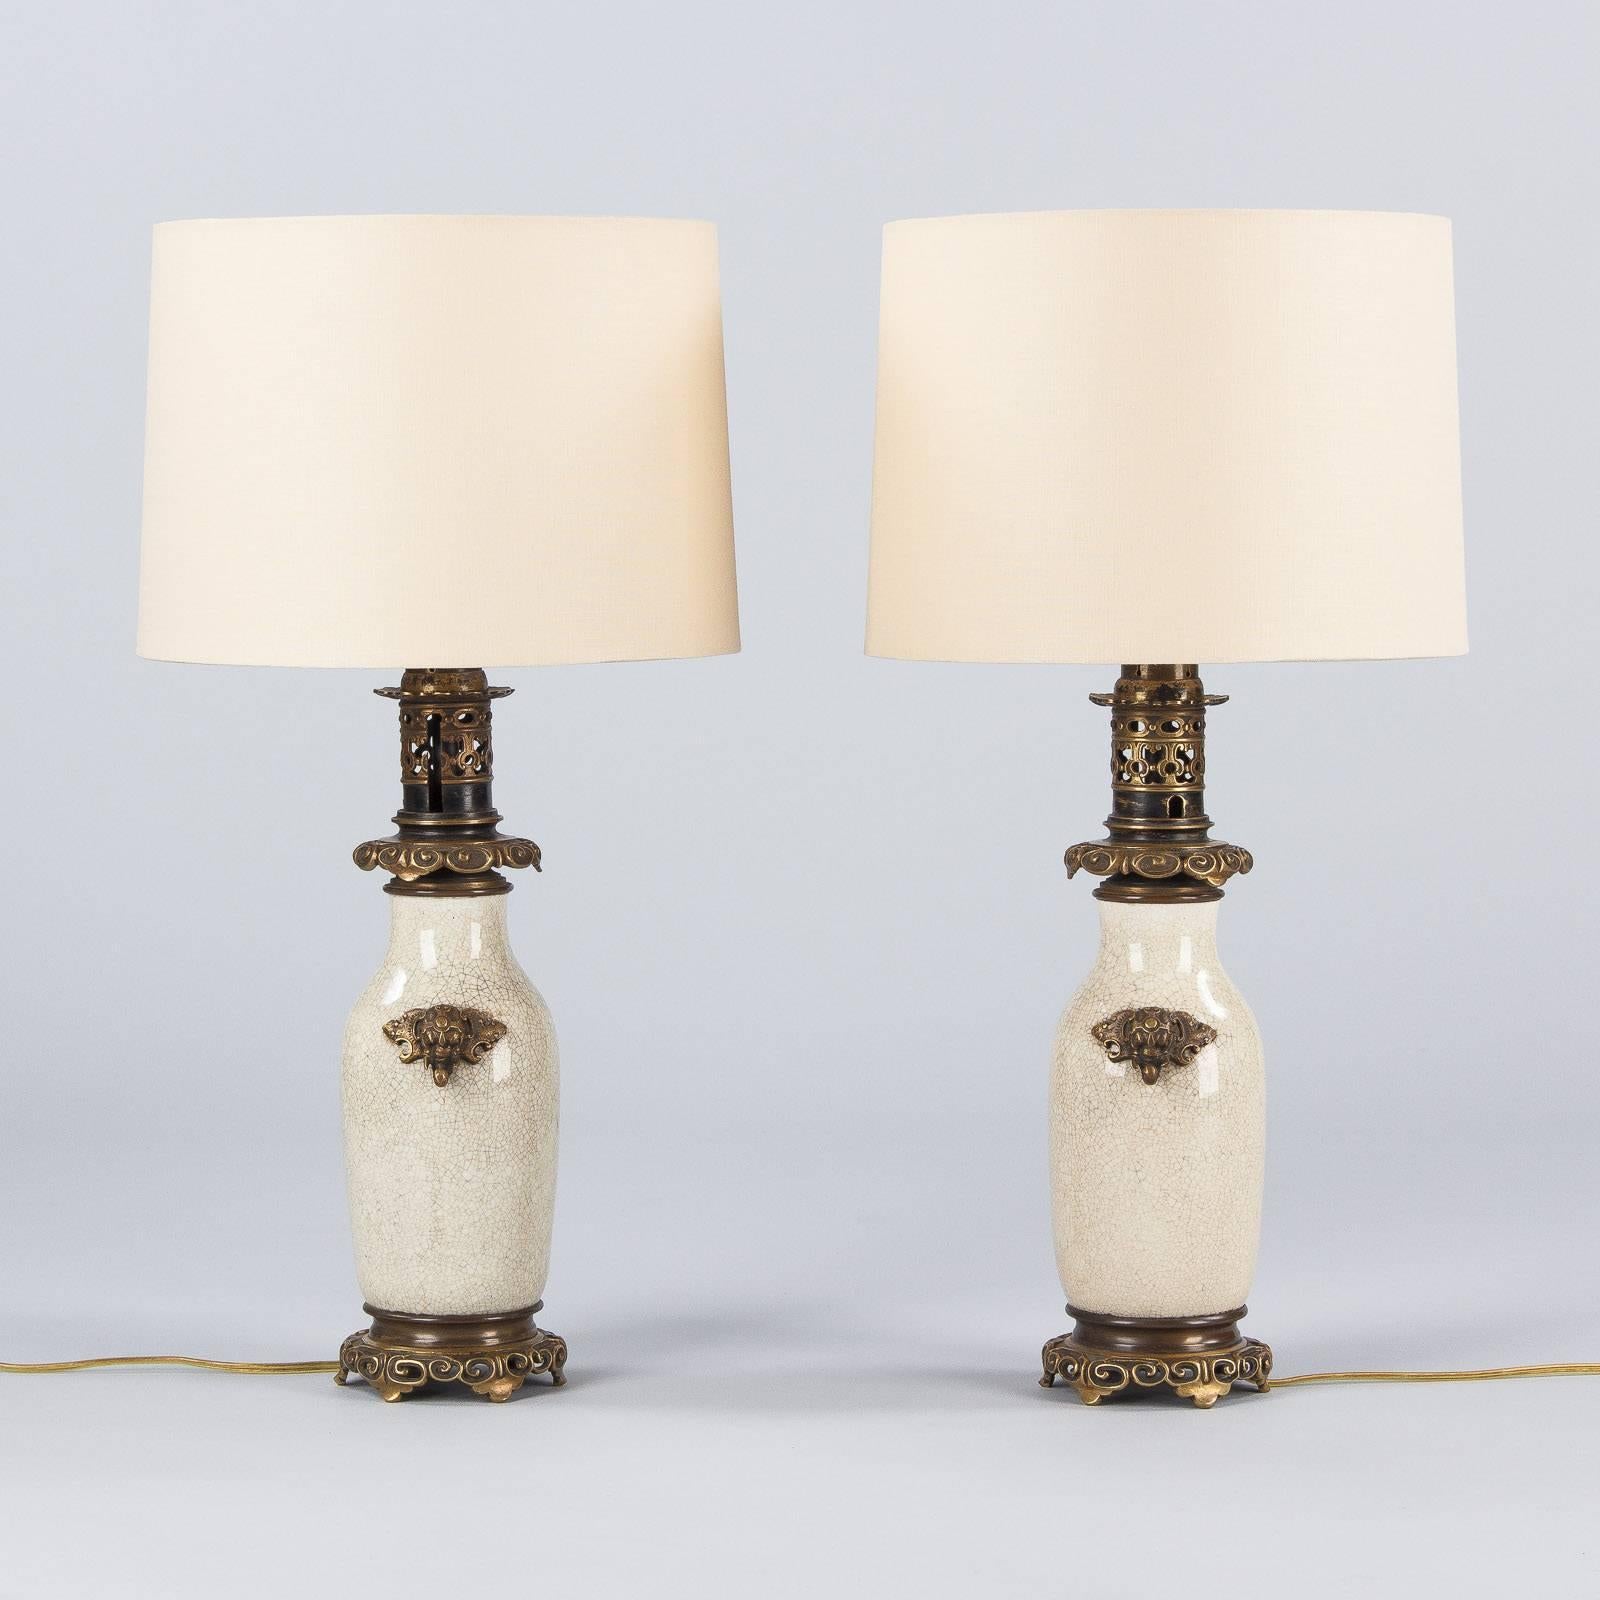 Bronze Pair of French Crackle Glaze Ceramic Lamps, Late 1800s